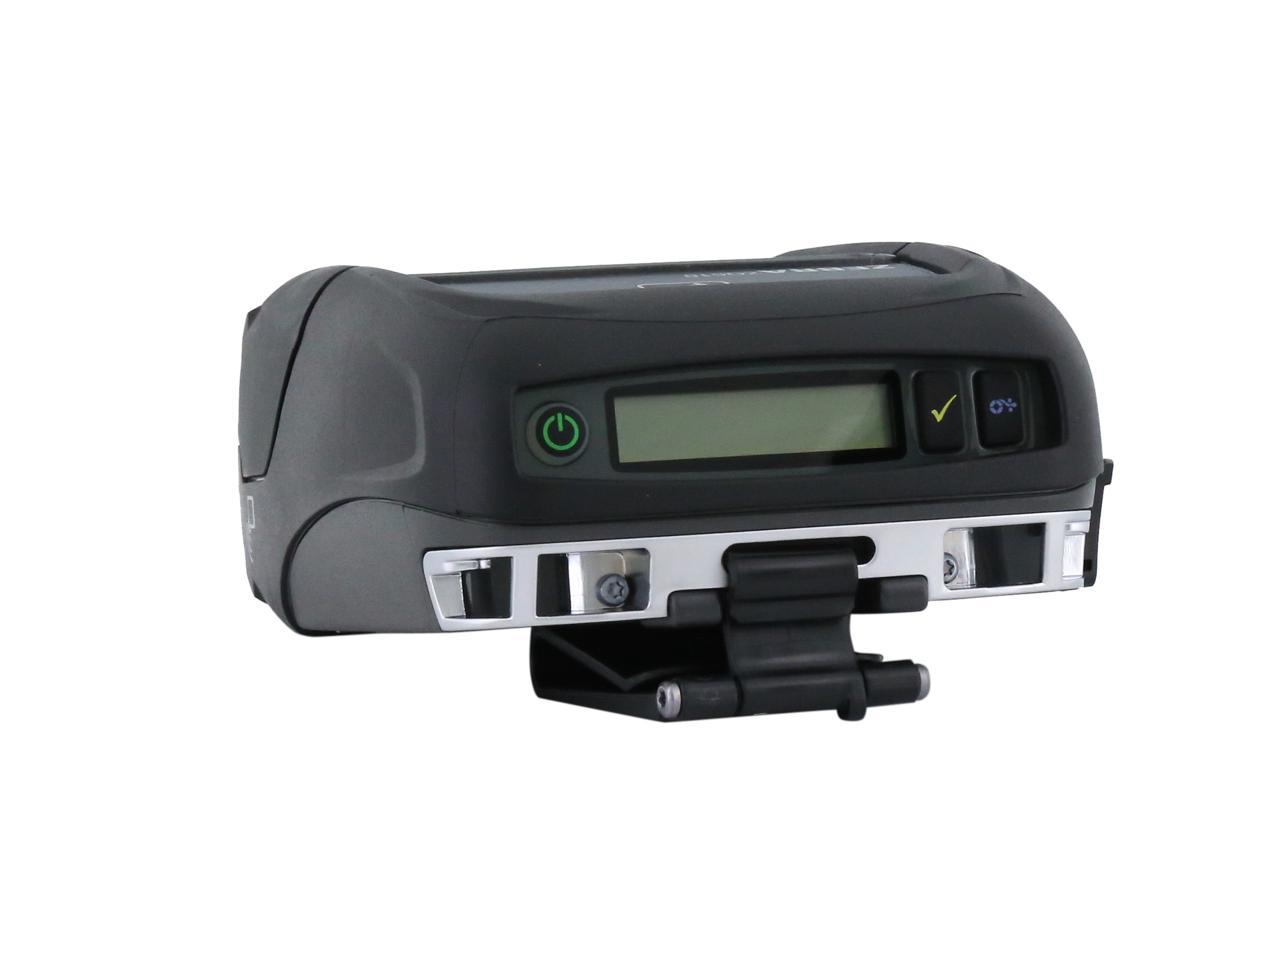 Zebra Zq510 3 Mobile Direct Thermal Receipt And Label Printer 203 Dpi Bluetooth 40 Linered 0057